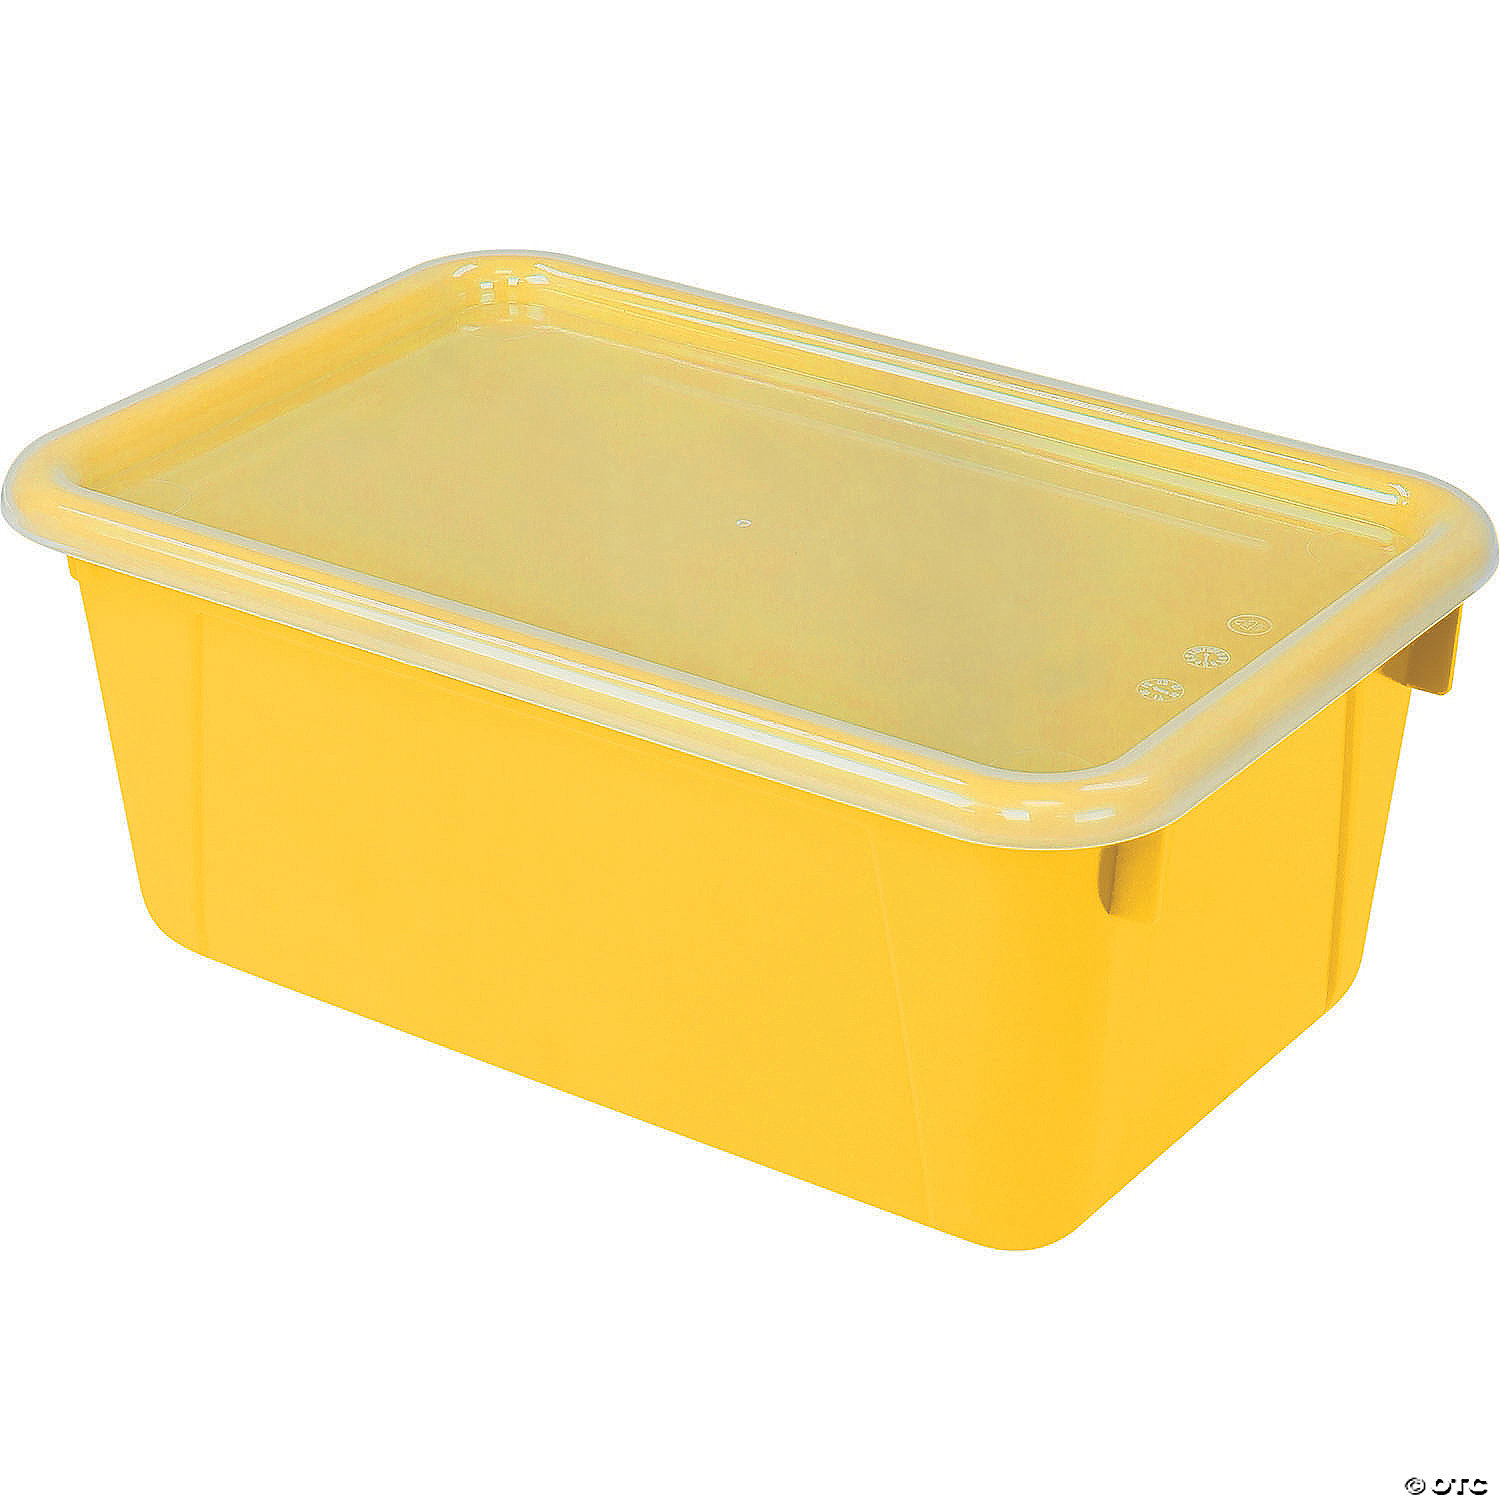 https://s7.orientaltrading.com/is/image/OrientalTrading/VIEWER_ZOOM/storex-small-cubby-bin-with-lid-classroom-yellow-set-of-3~13837467